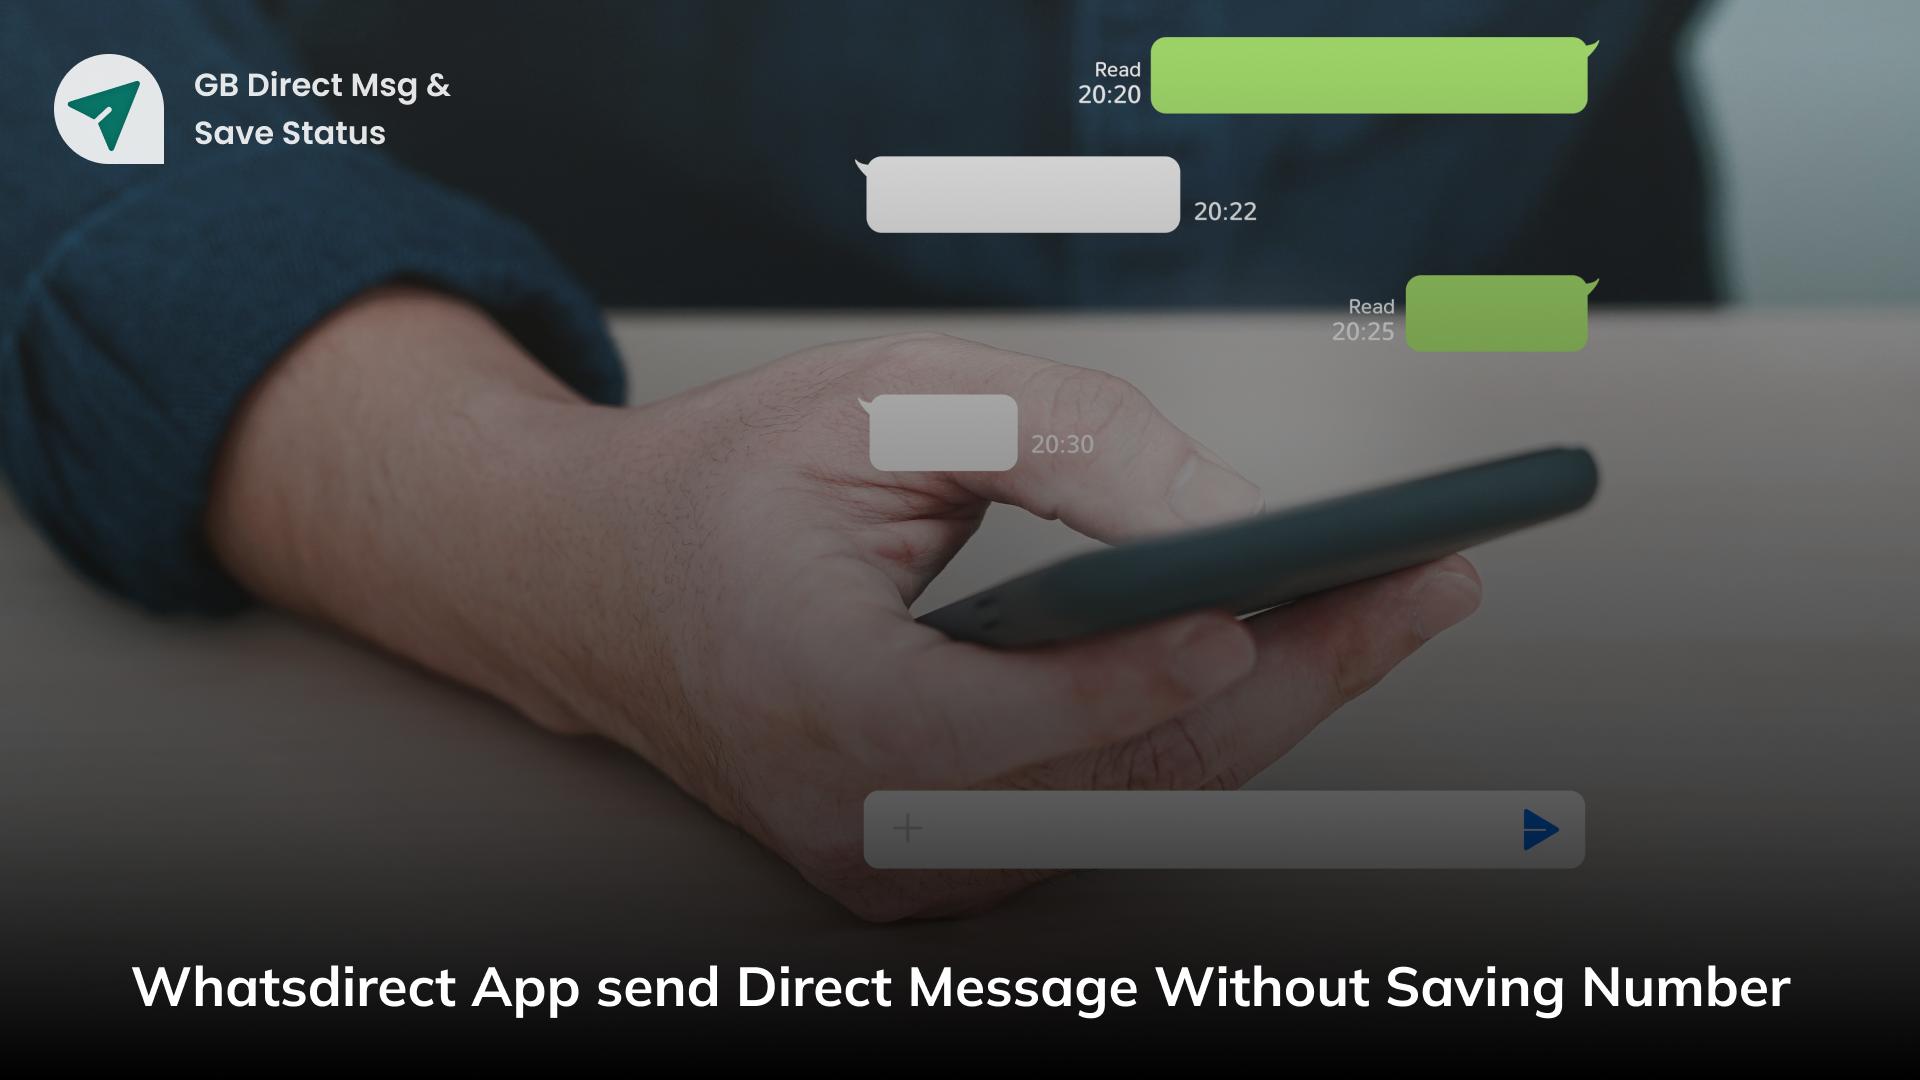 Whatsdirect App send Direct Message Without Saving Number